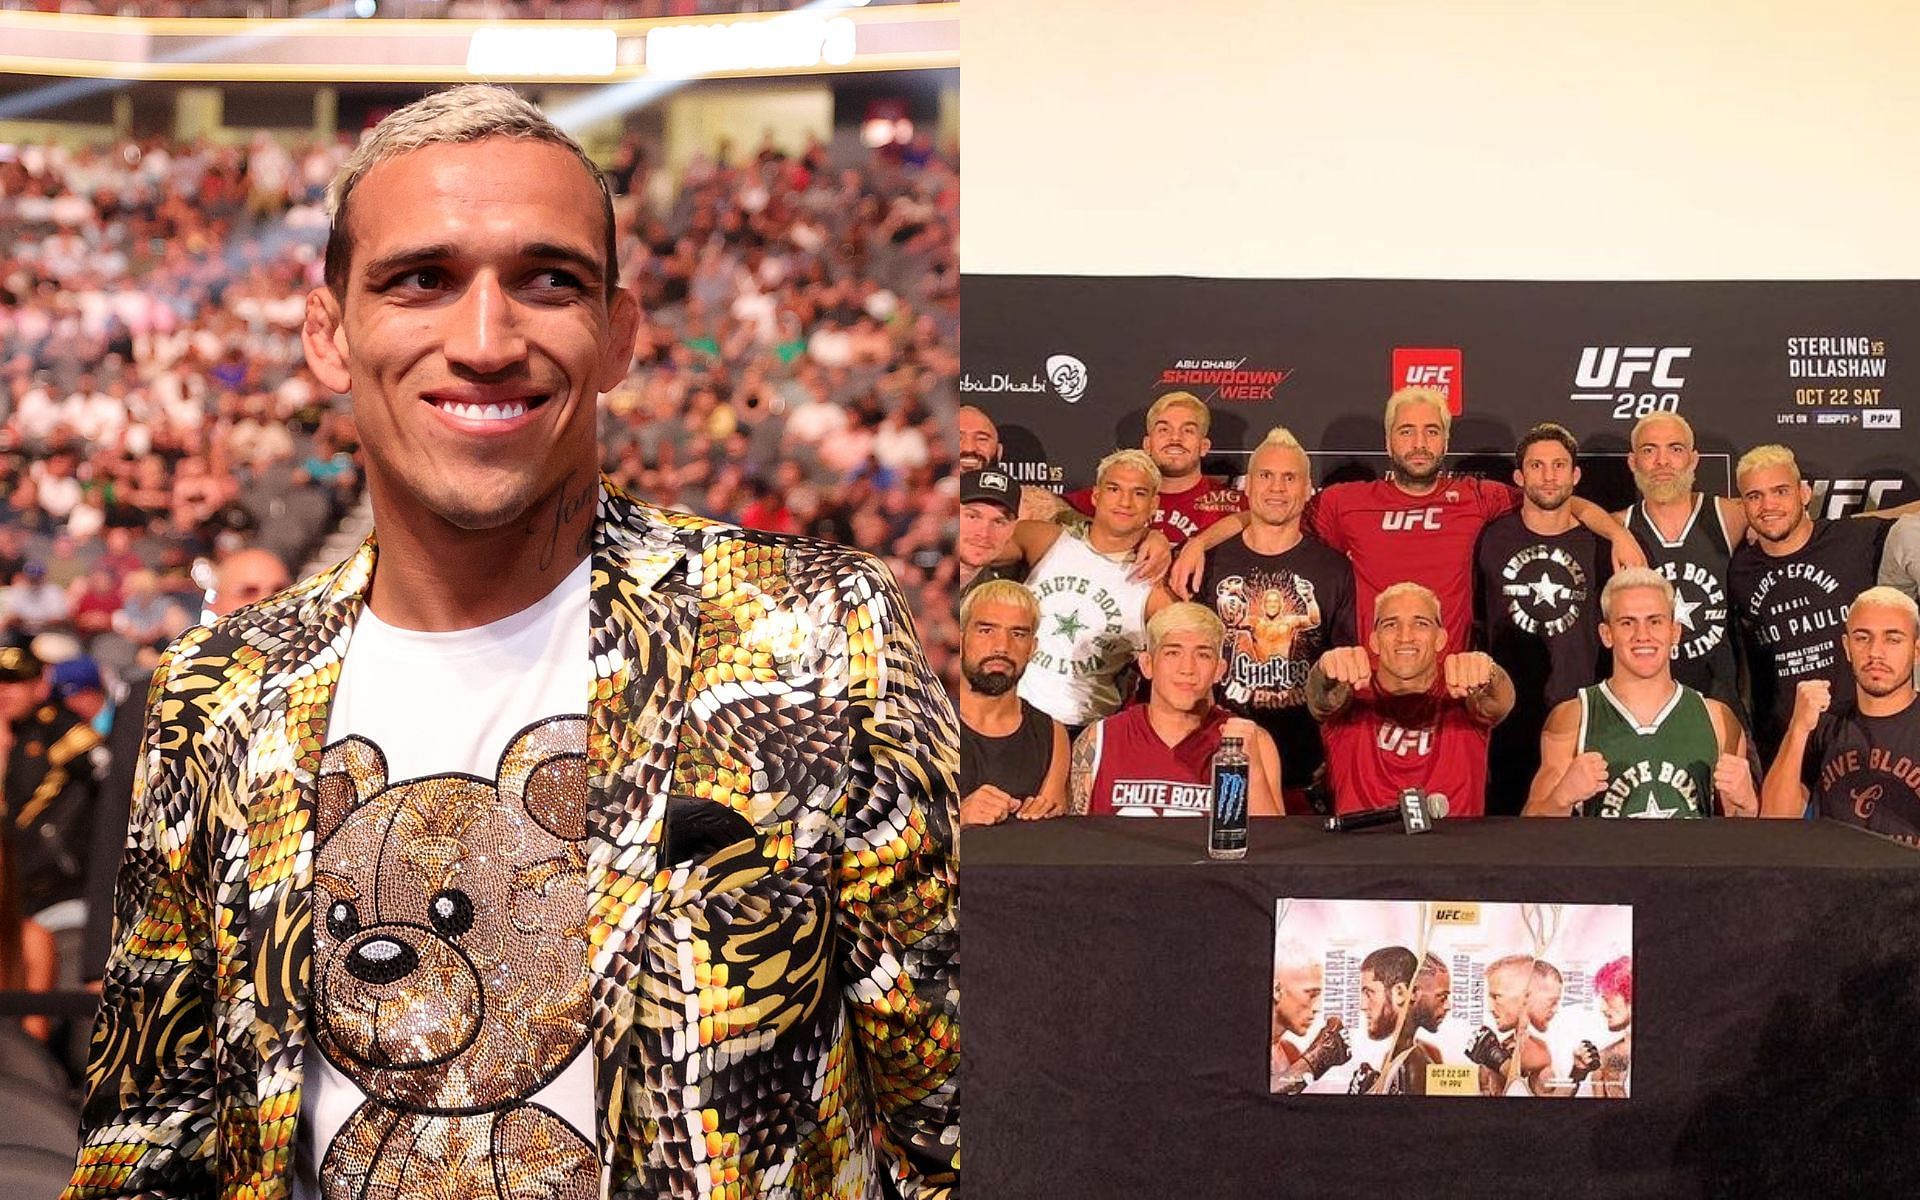 Charles Oliveira (Left), Oliveira and his team at the UFC 280 media day (Right) [Image courtesy: Getty Images and @charlesdobronxs Instagram]